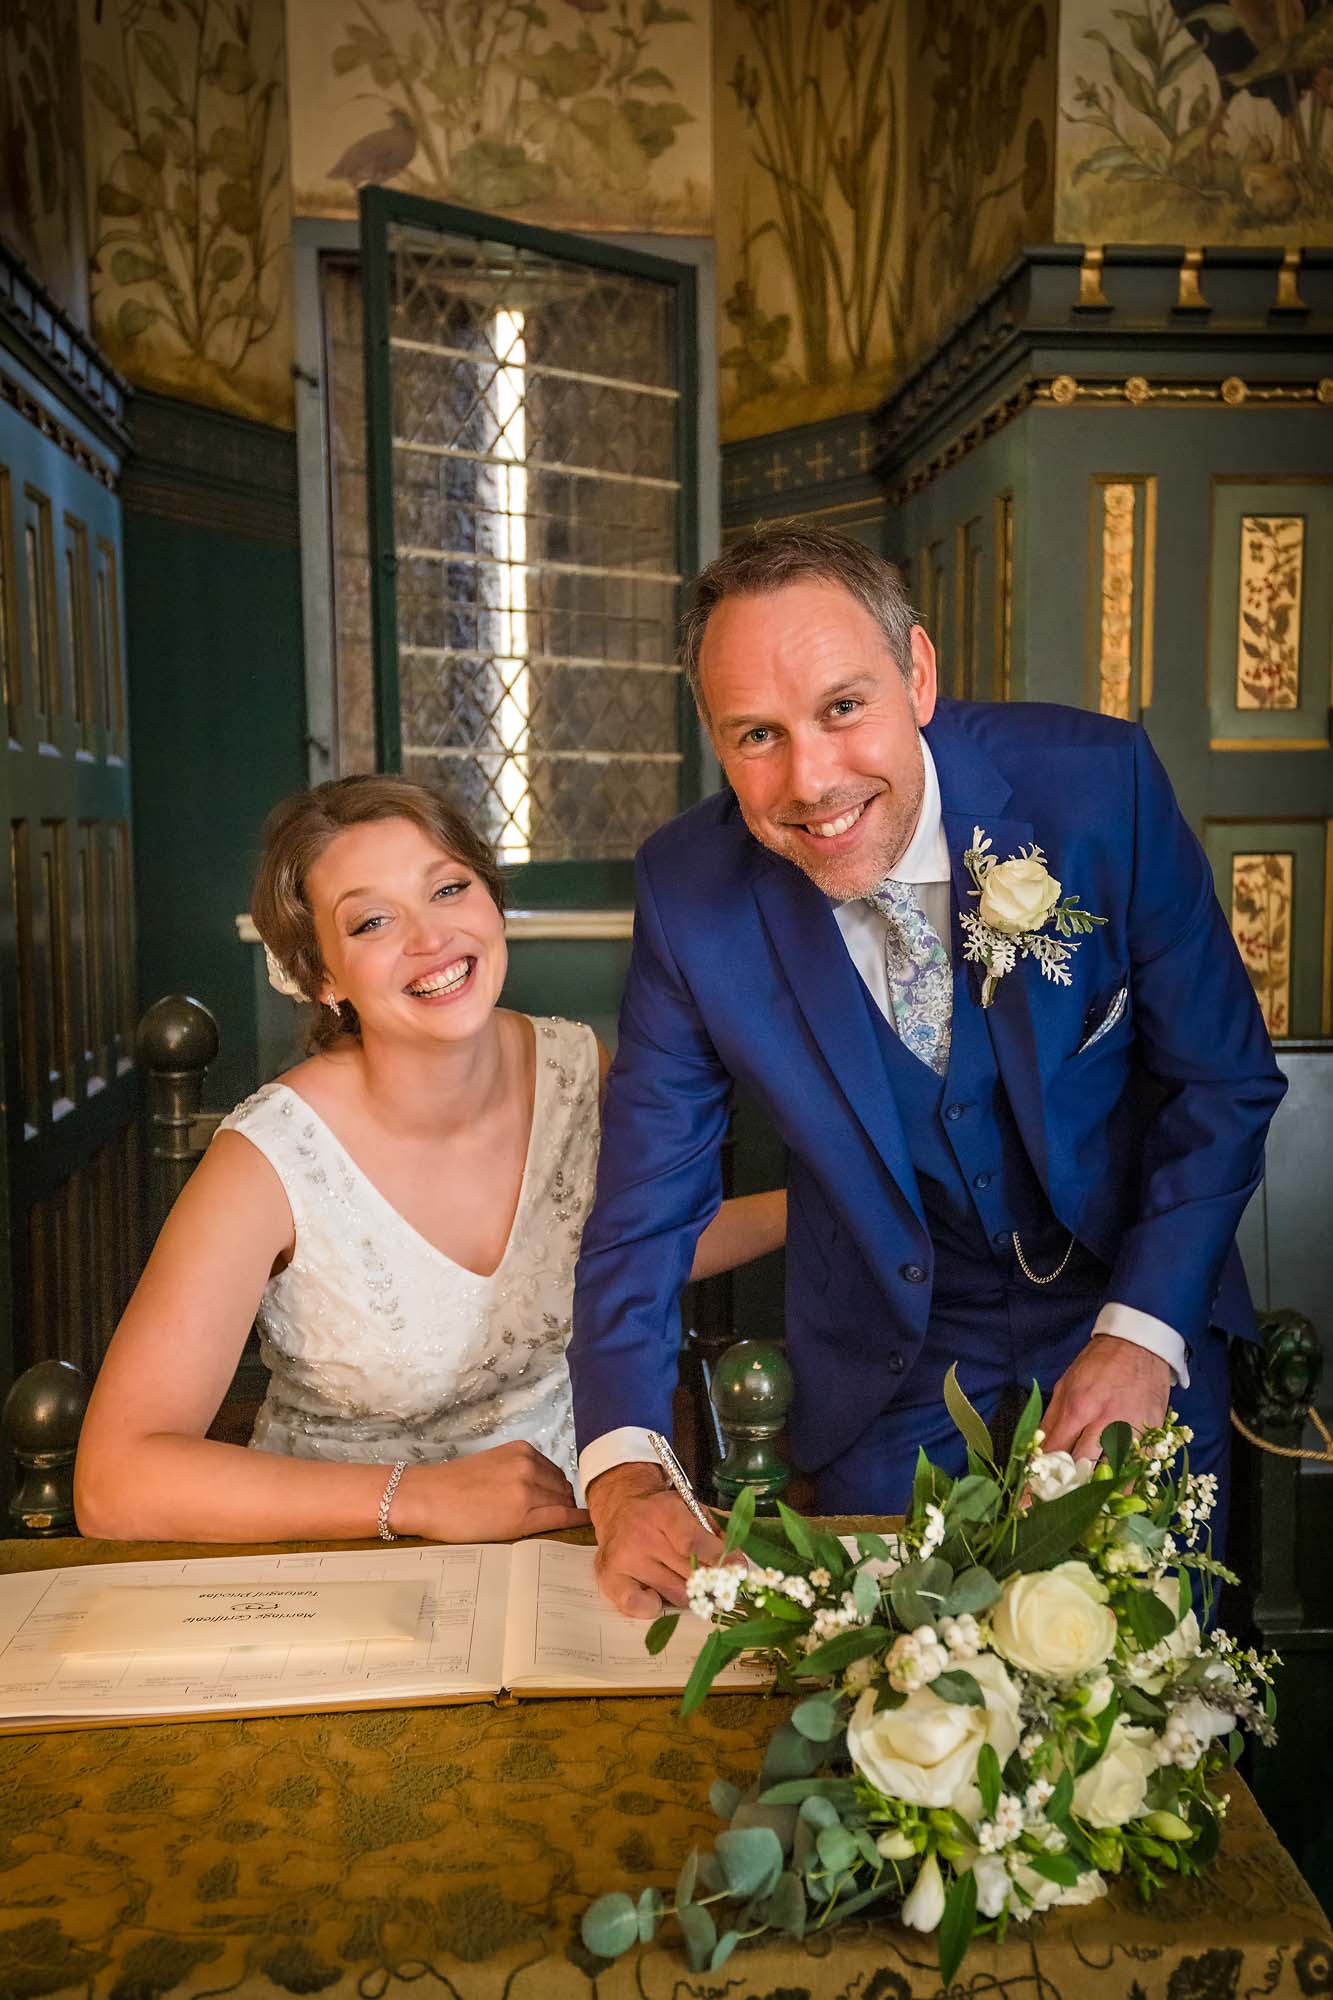 The bride and groom pose with the register in the drawing room at Castell Coch